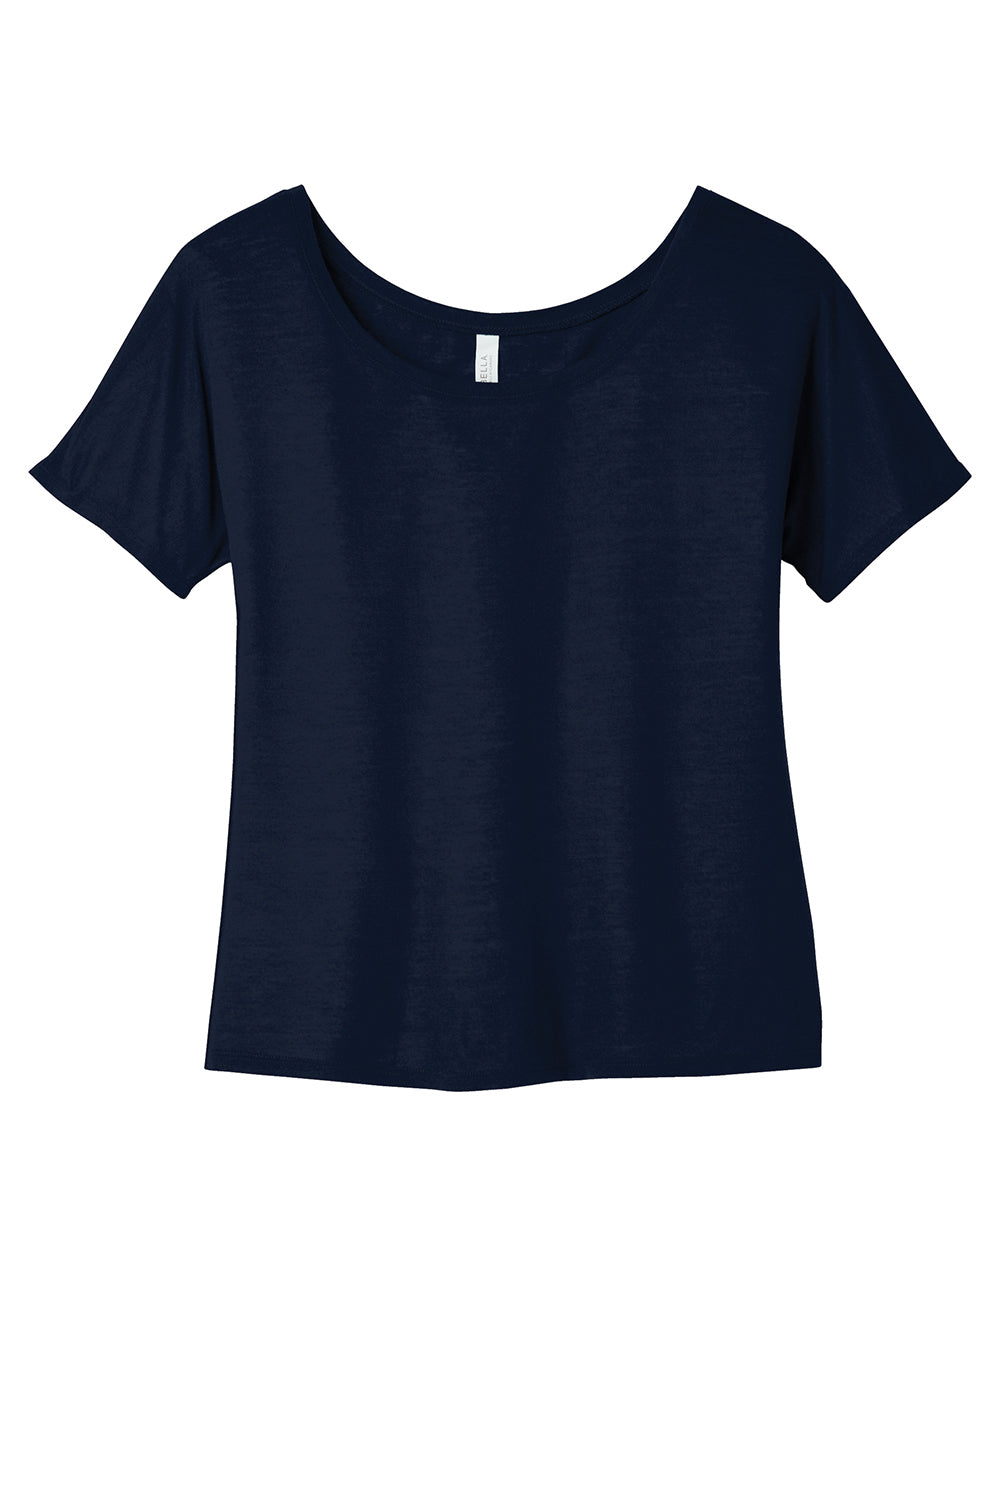 Bella + Canvas BC8816/8816 Womens Slouchy Short Sleeve Wide Neck T-Shirt Midnight Blue Flat Front